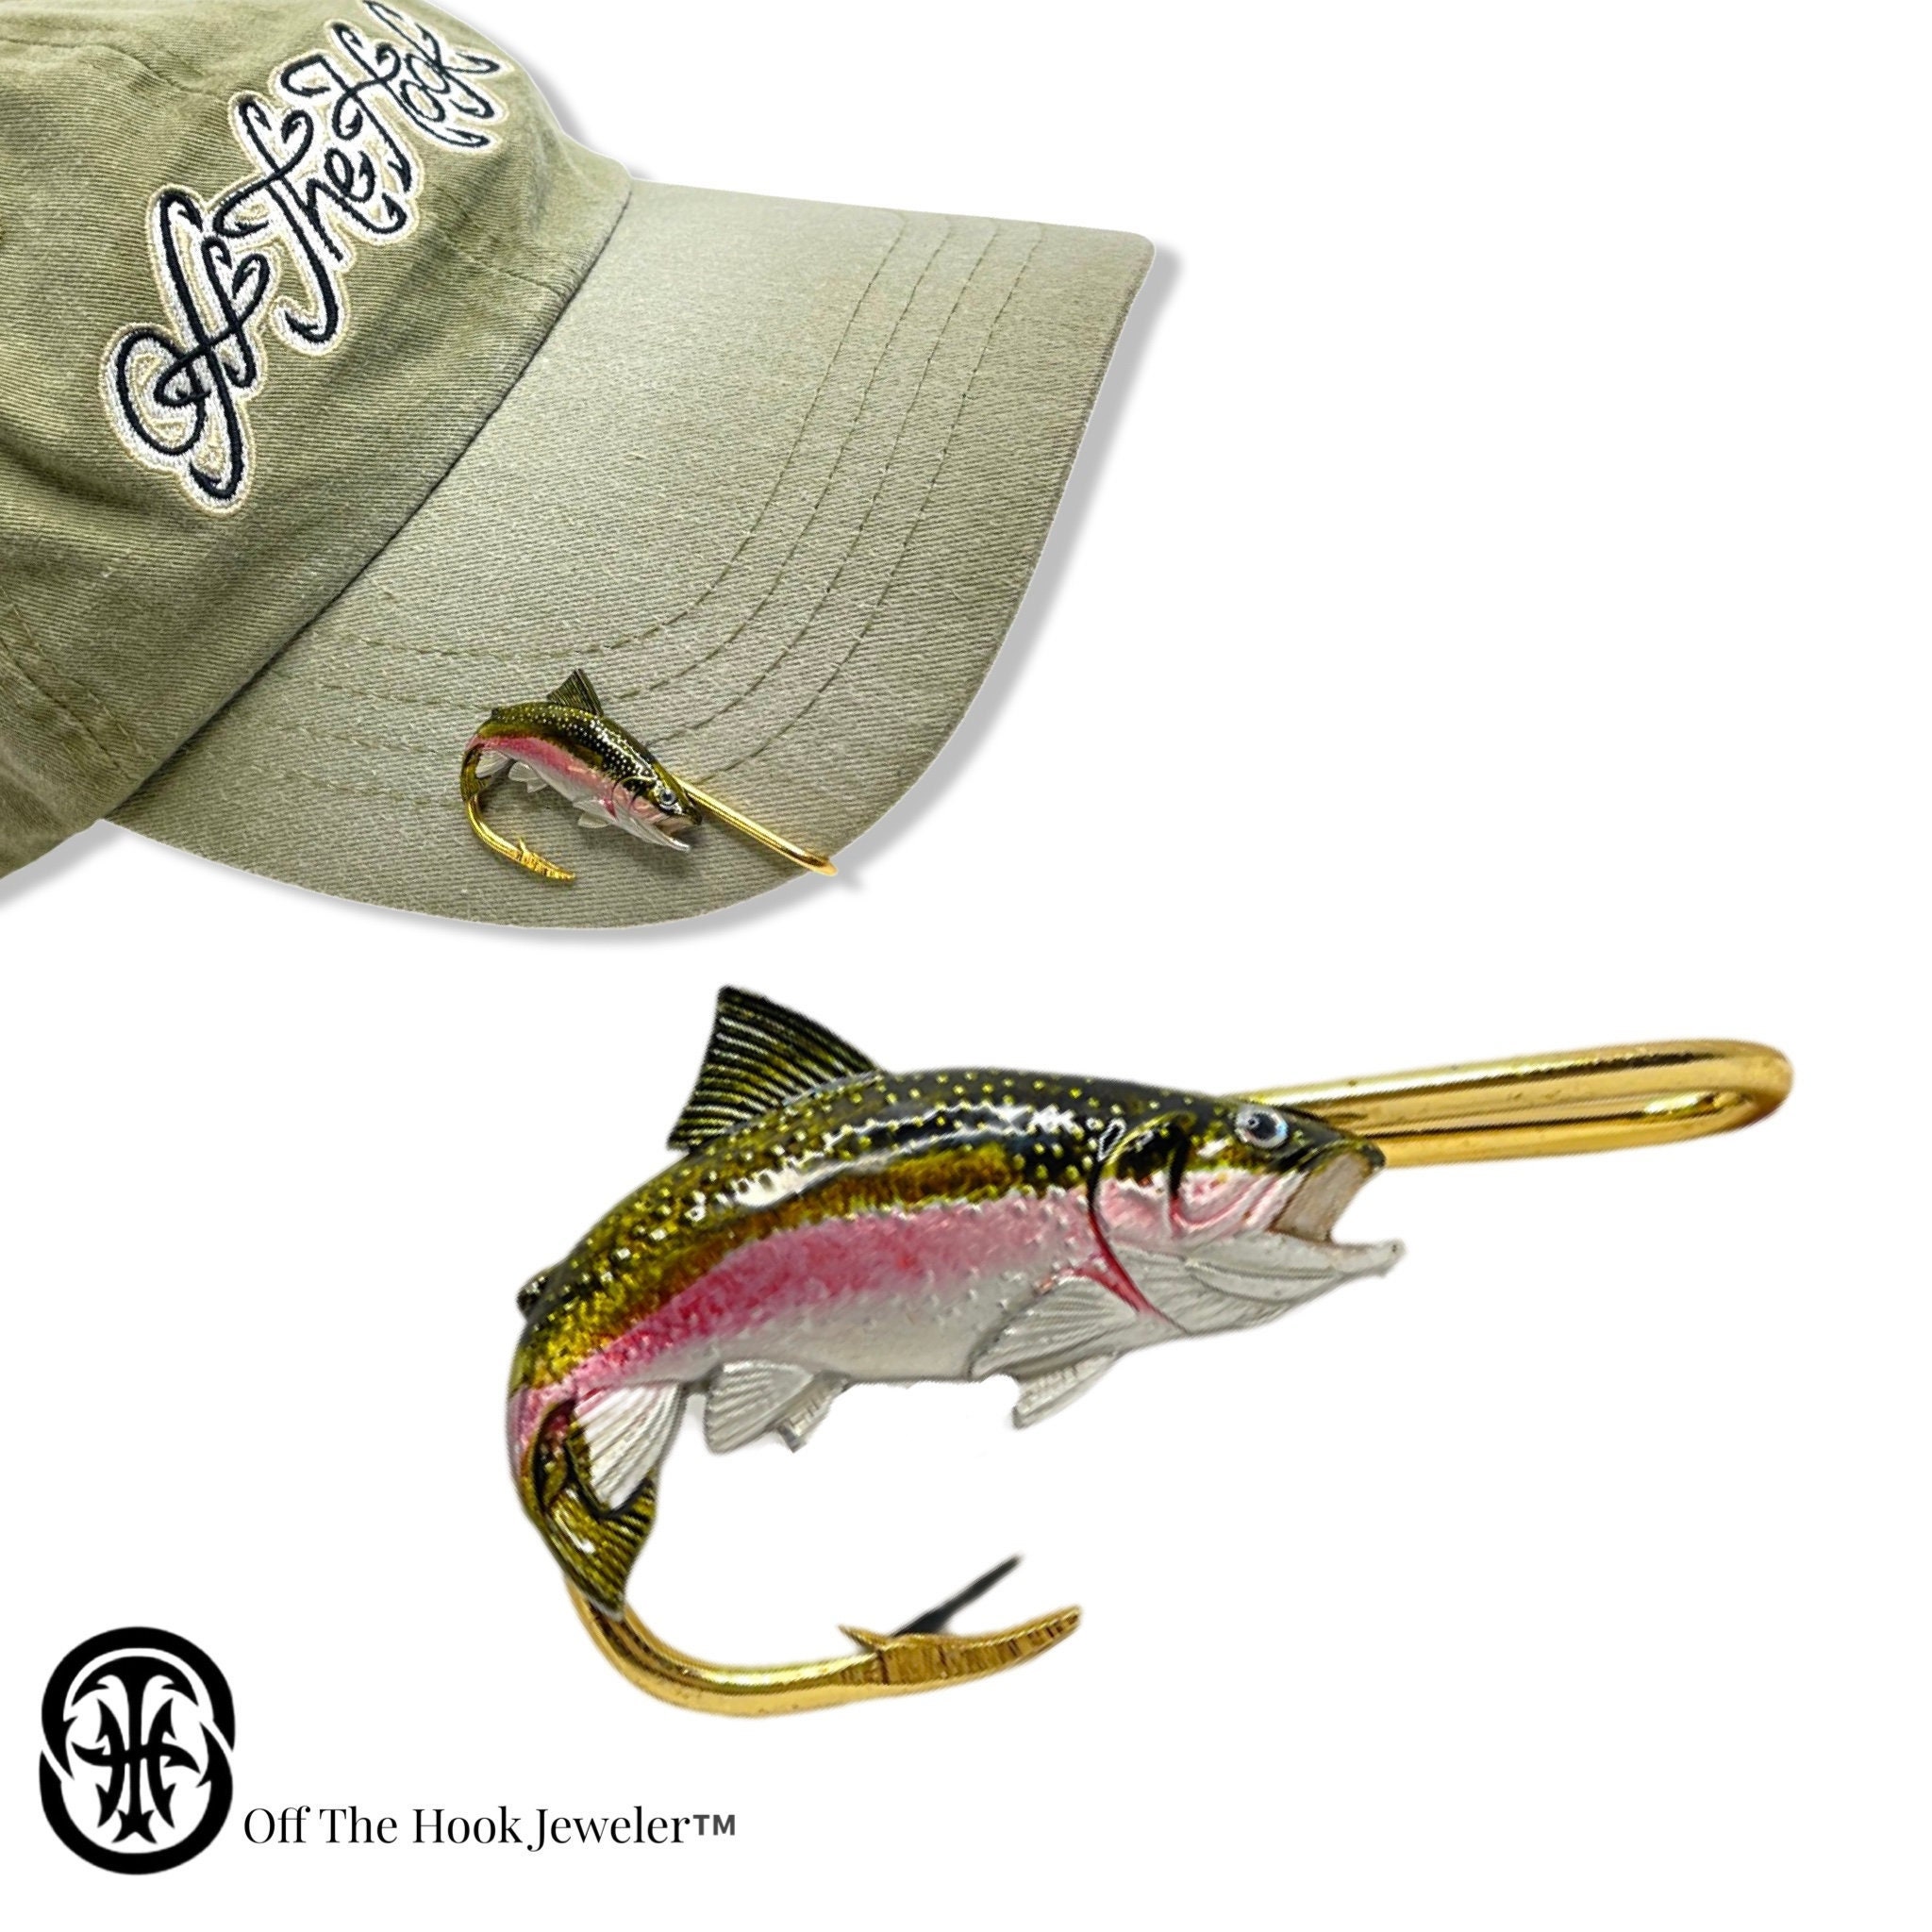 Fly Fishing Hat 